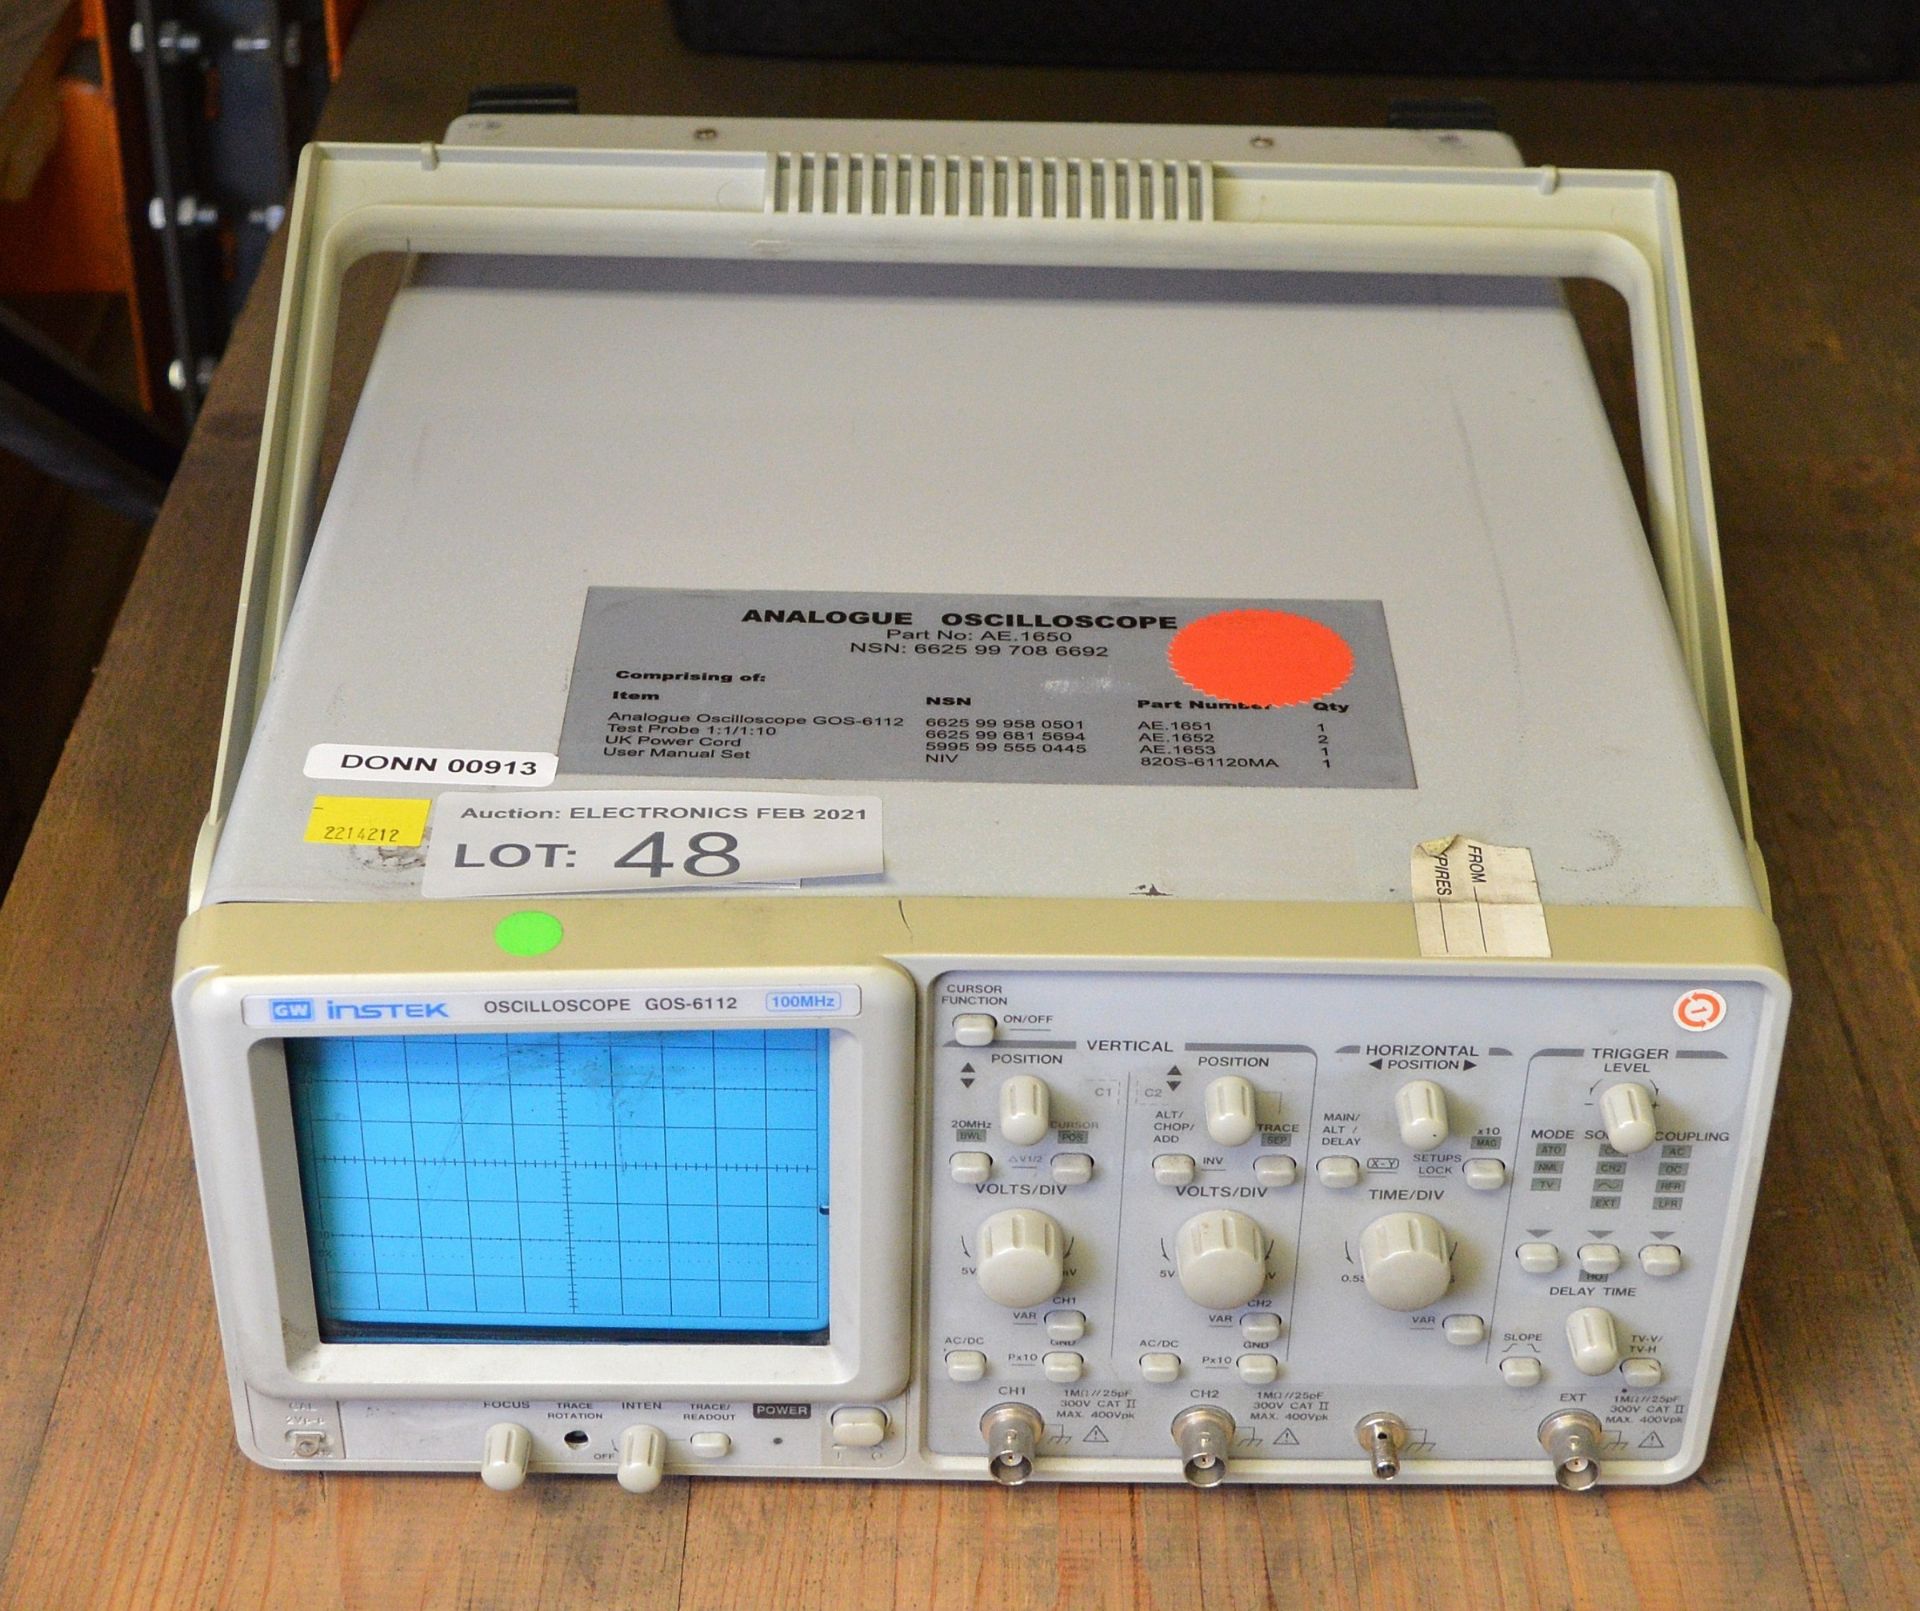 GW Instek GOS-6112 Oscilloscope - 100MHz (Damage as seen in pictures) - Image 2 of 4